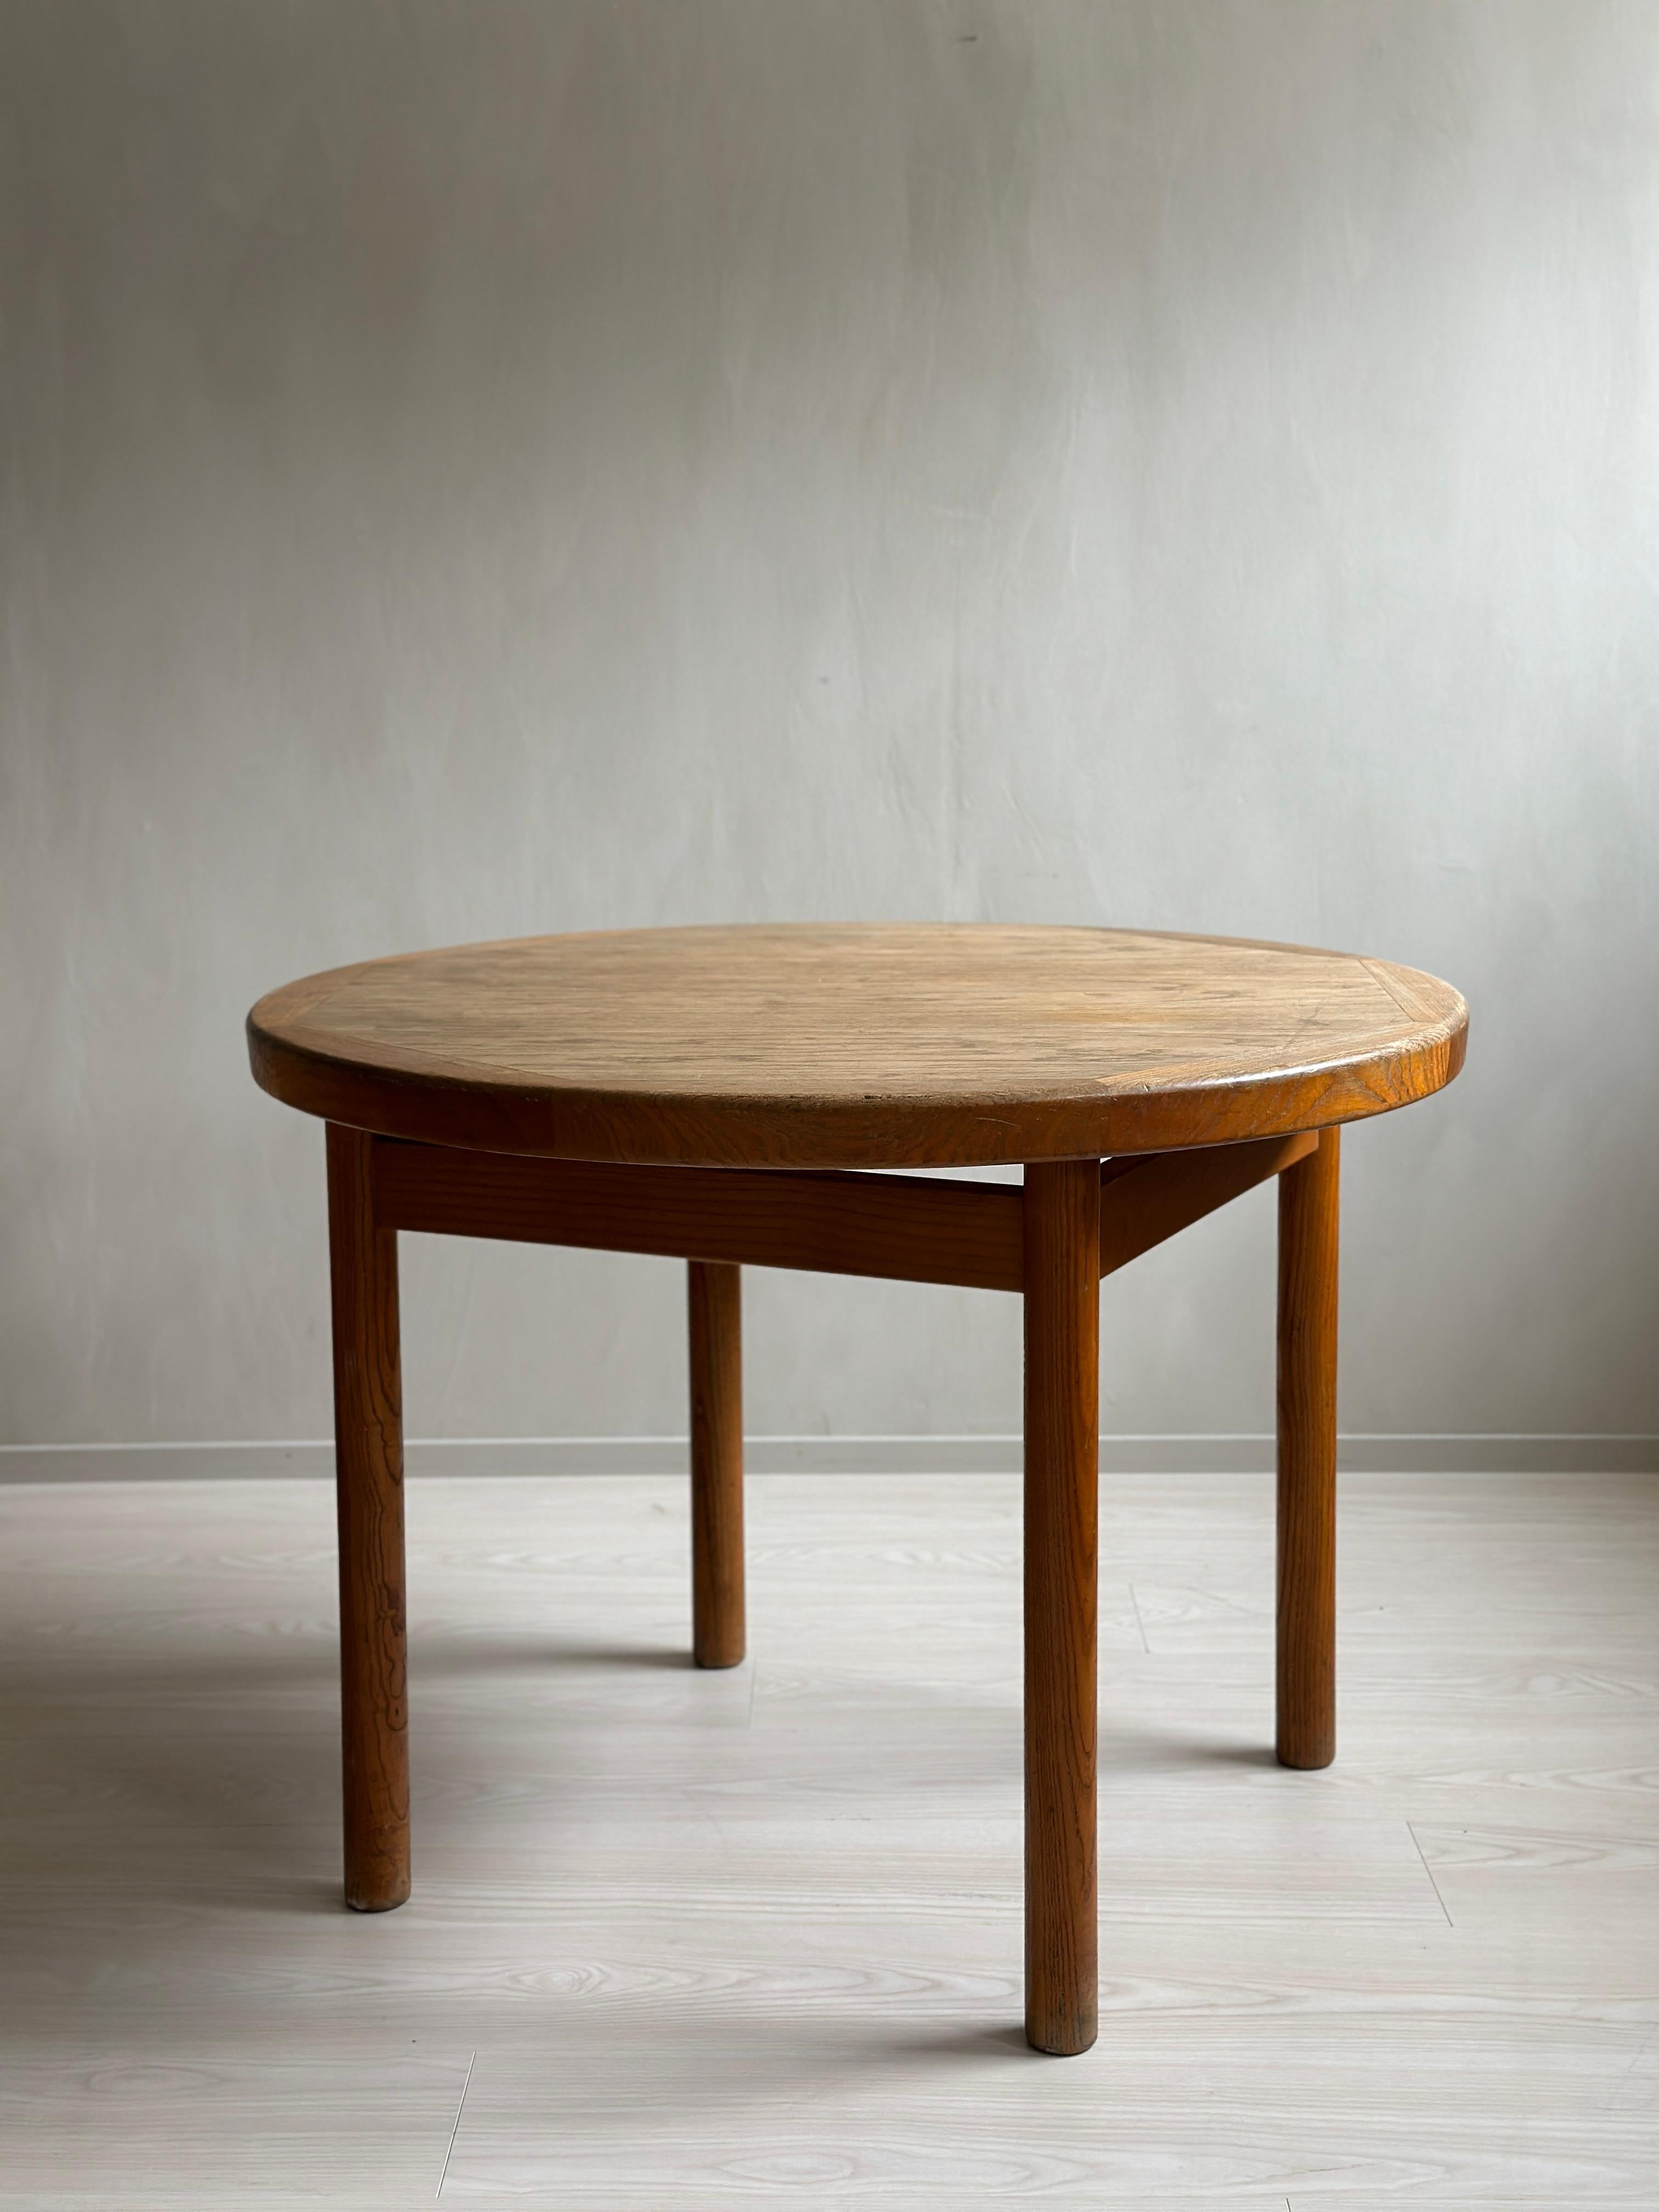 Charlotte Perriand (1903-1999) 
'Dordogne' table
Manufactured by Robert Sentou 
Ash and veneer 
Model created, circa 1960s
Measures: H 74 × Ø 100 cm.



